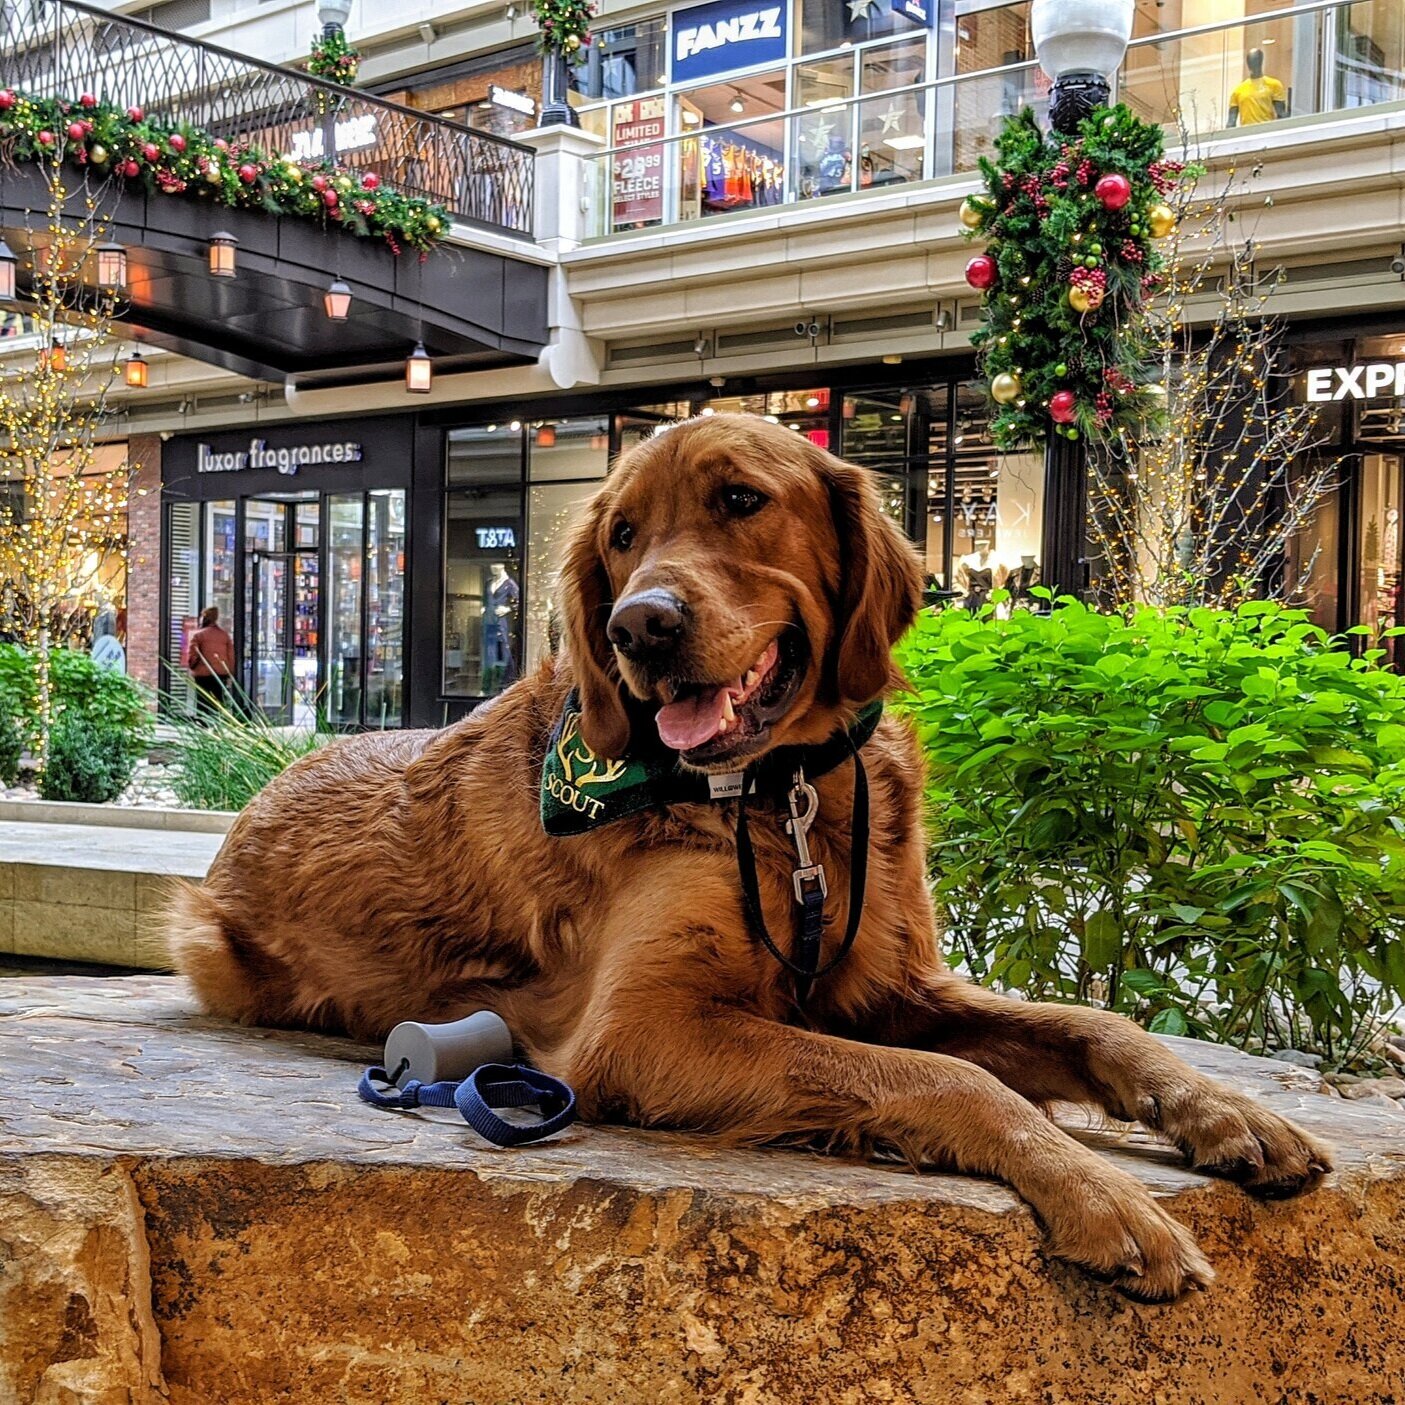 A golden retriever sits on a rock in an indoor mall that has been decorated for Christmas